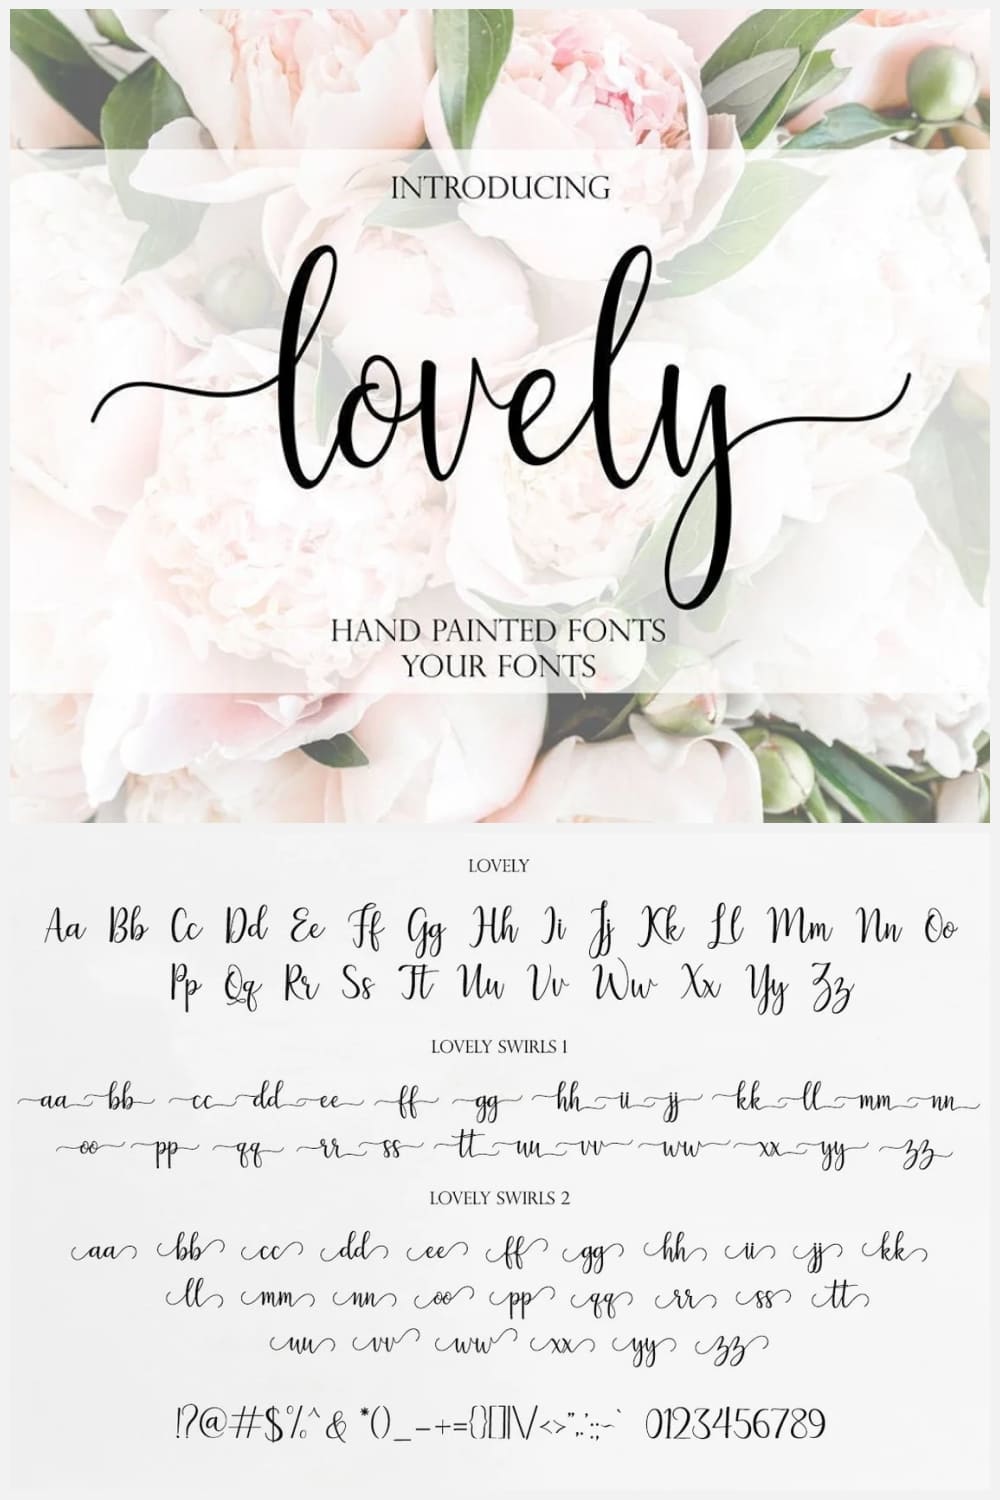 Variant of writing font letters on a background of flowers.